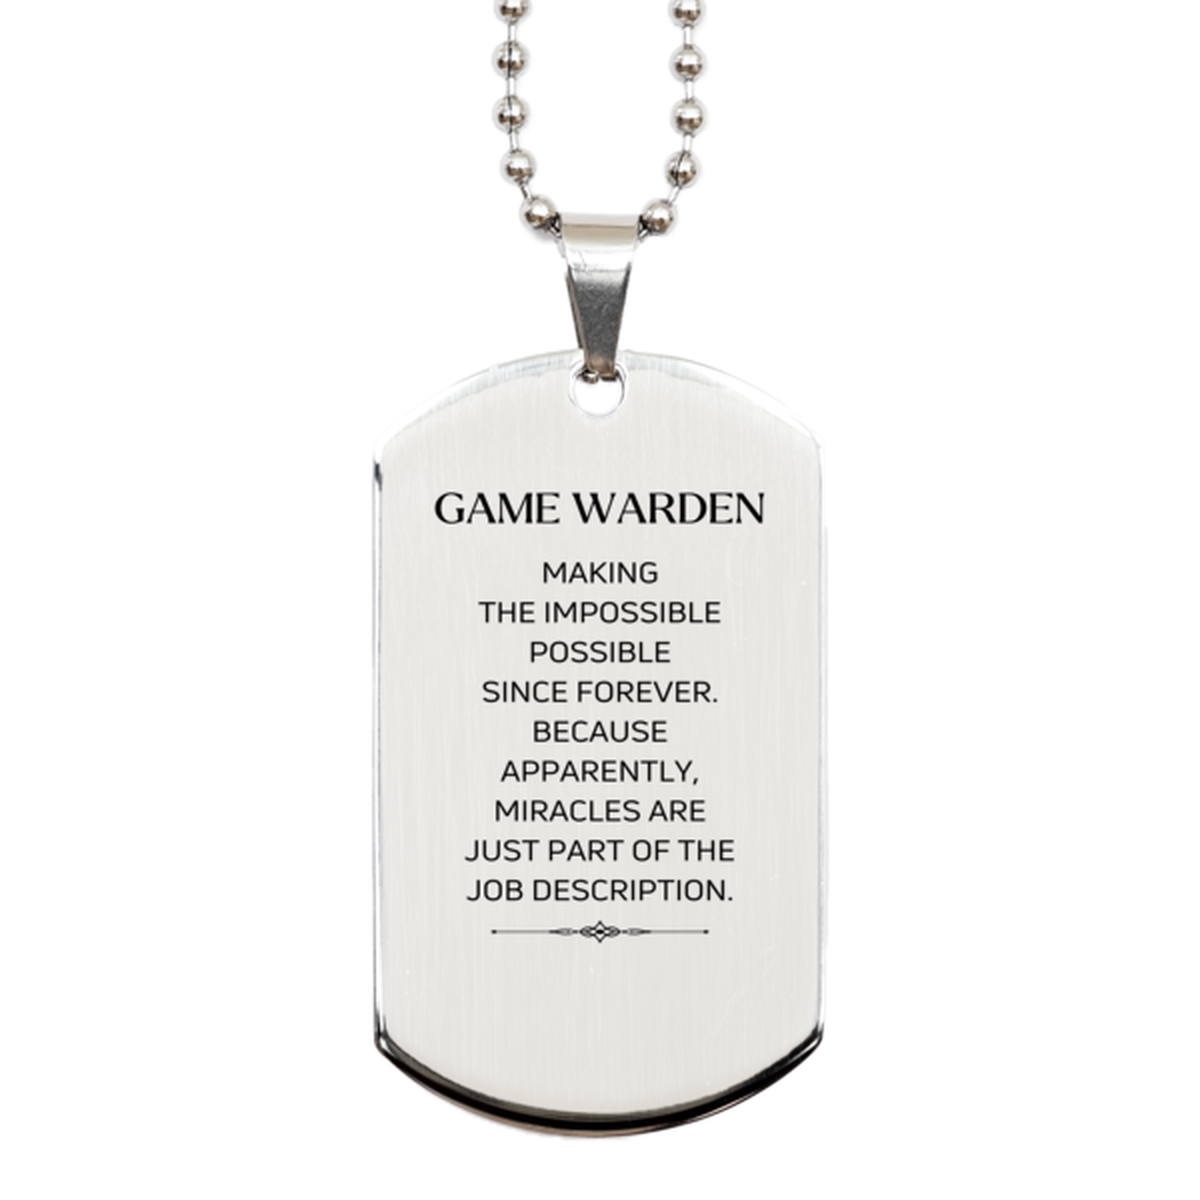 Funny Game Warden Gifts, Miracles are just part of the job description, Inspirational Birthday Silver Dog Tag For Game Warden, Men, Women, Coworkers, Friends, Boss